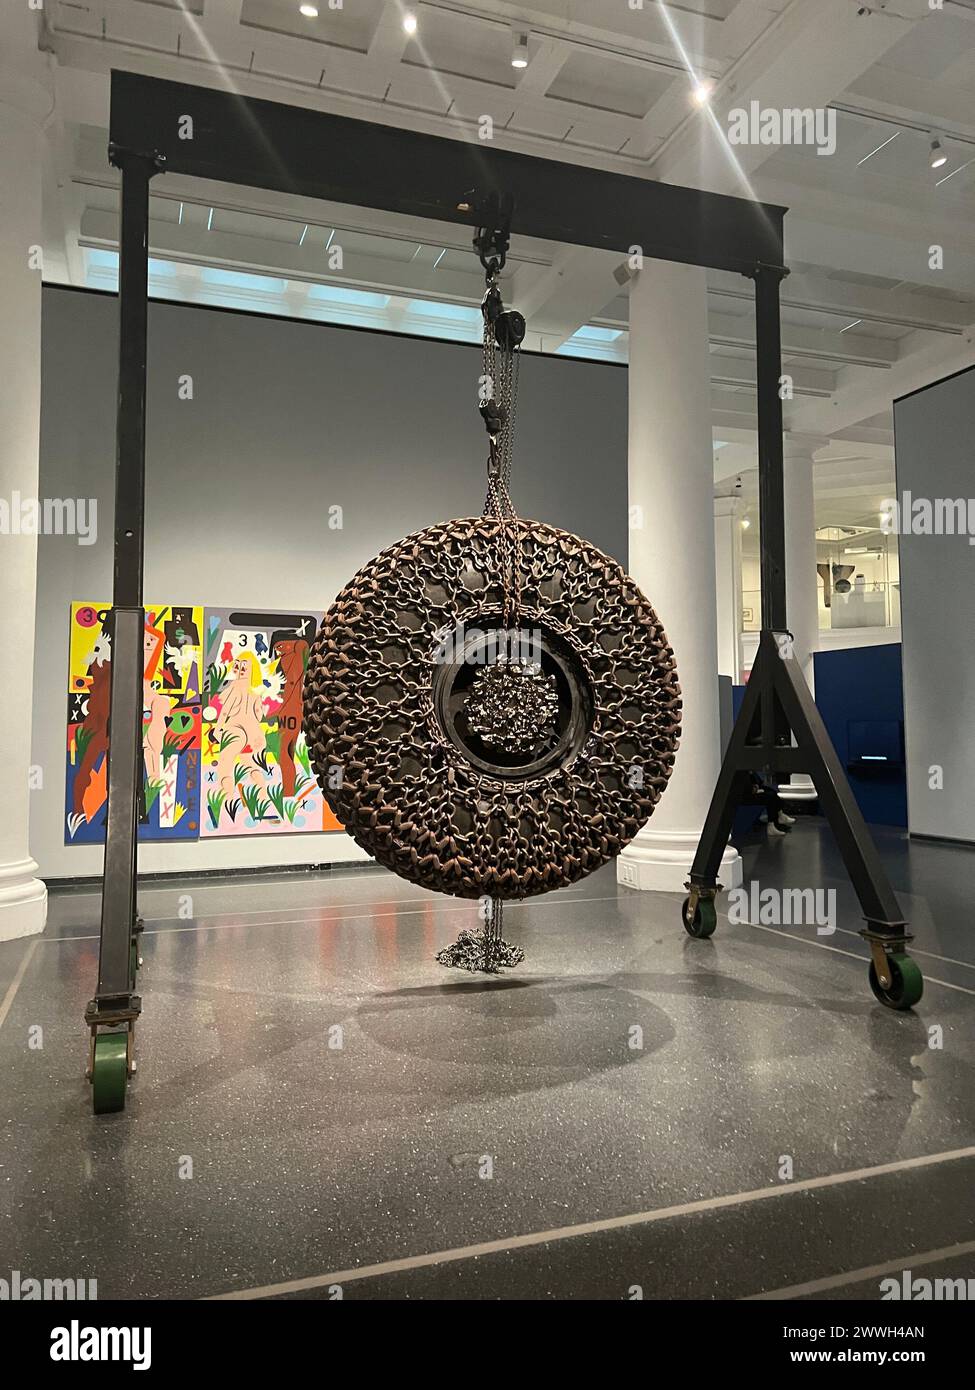 Big Wheel 1, 2018, by Arthur Jafa. Chains, rim, hubcap, tire. Giants exhibition at the Brooklyn Museum; Art from the Dean Collection of Swizz Beatz and Alicia Keys Stock Photo